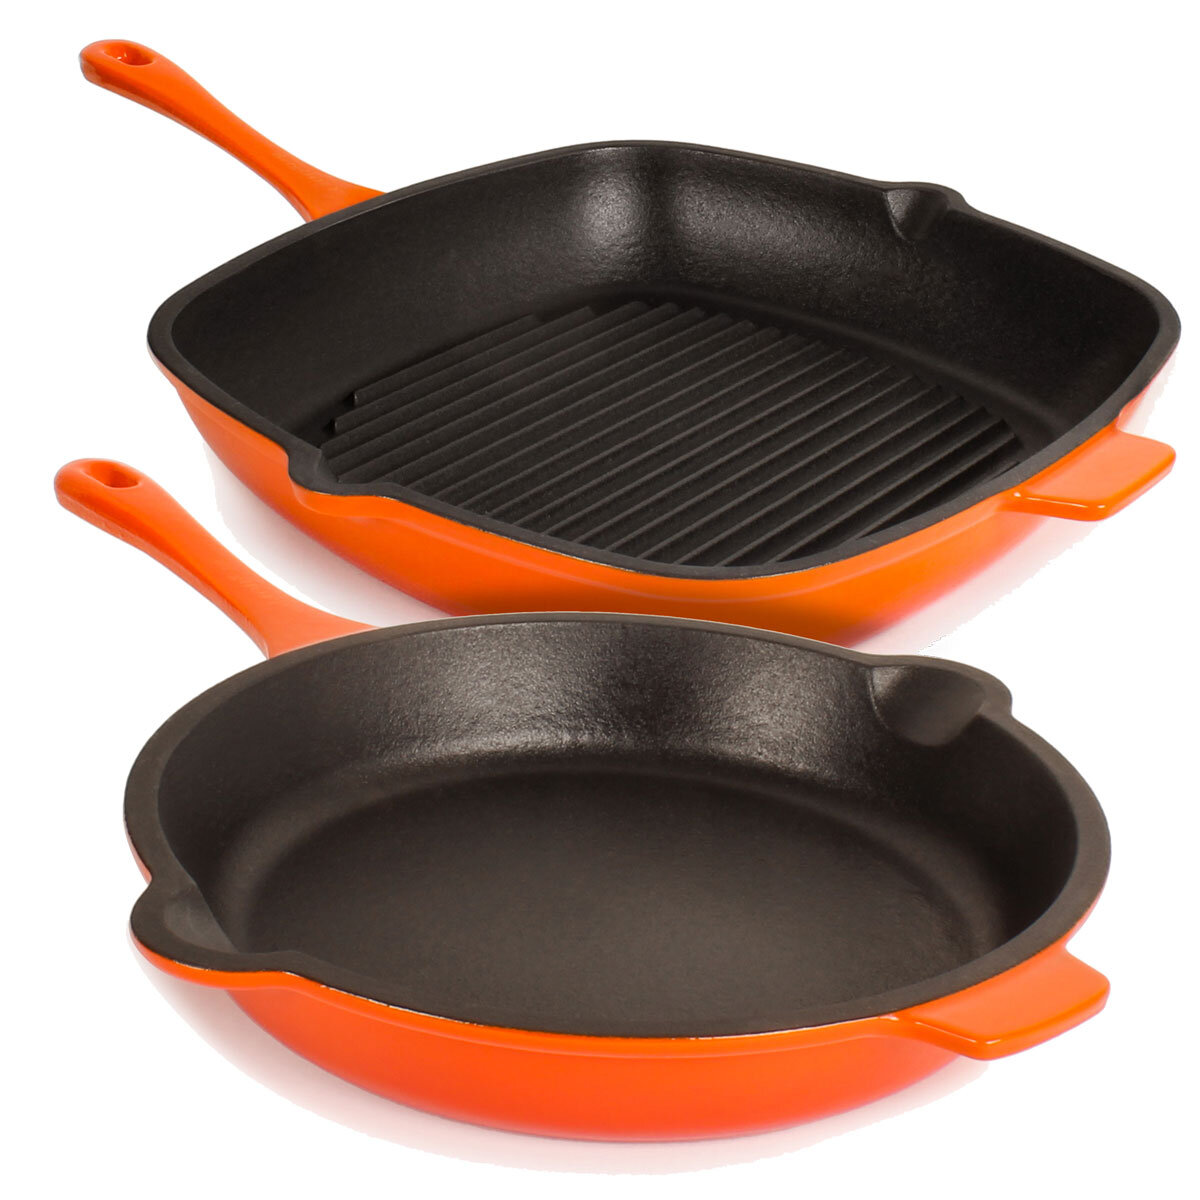 BergHOFF Neo Cast Iron 2 Piece Set in 3 Colours